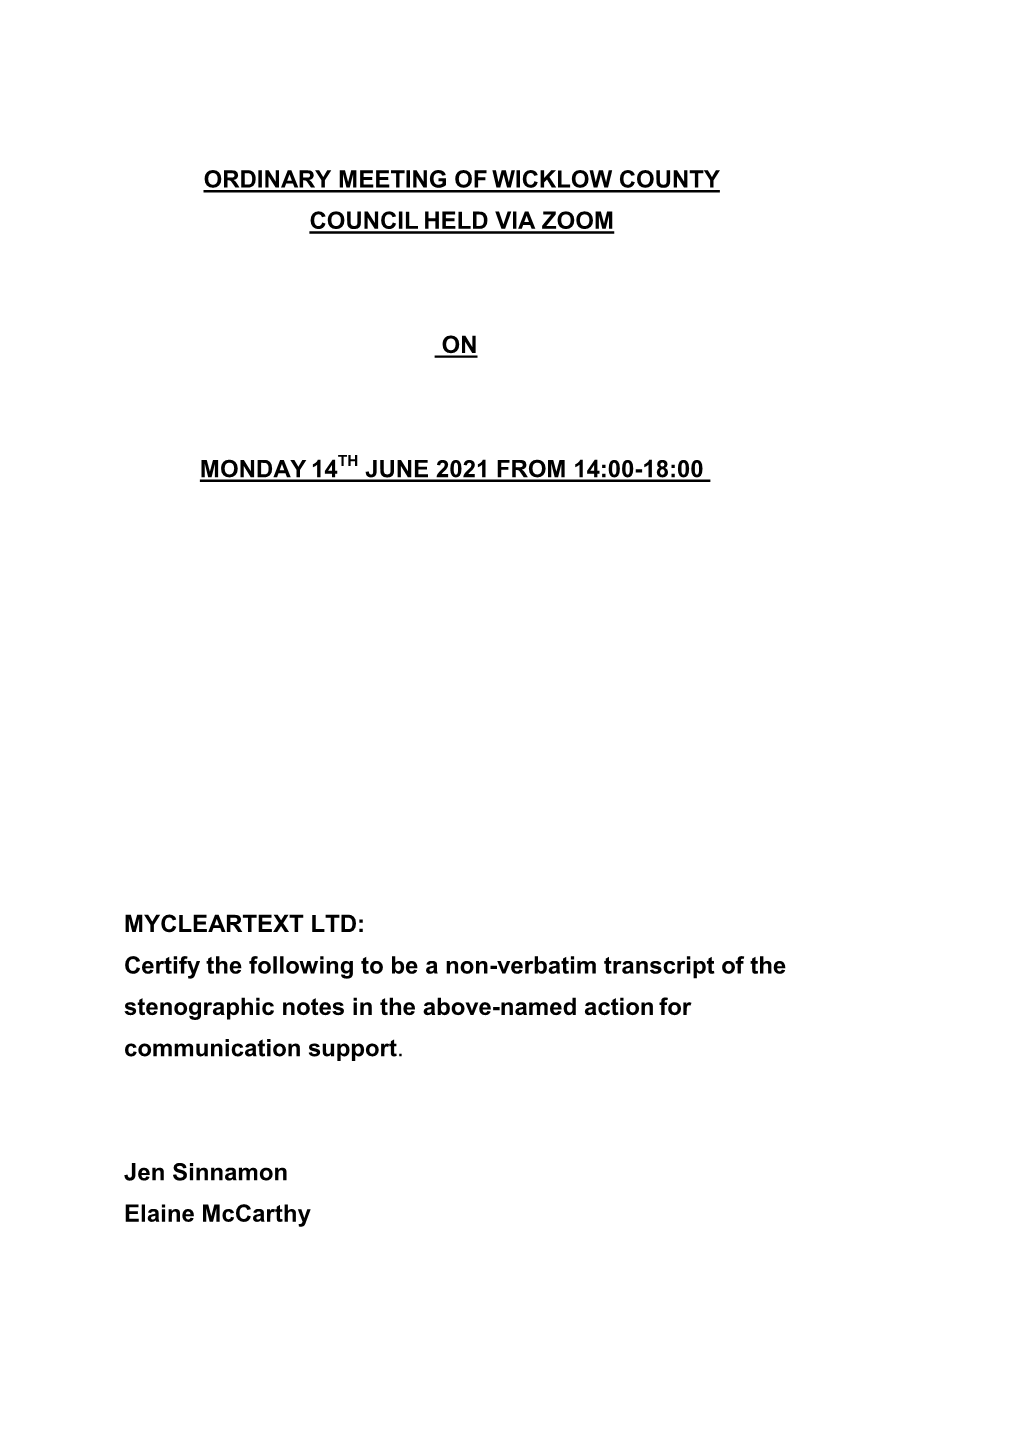 Ordinary Meeting of Wicklow County Council Held Via Zoom on Monday 14Th June 2021 from 14:00-18:00 Mycleartext Ltd